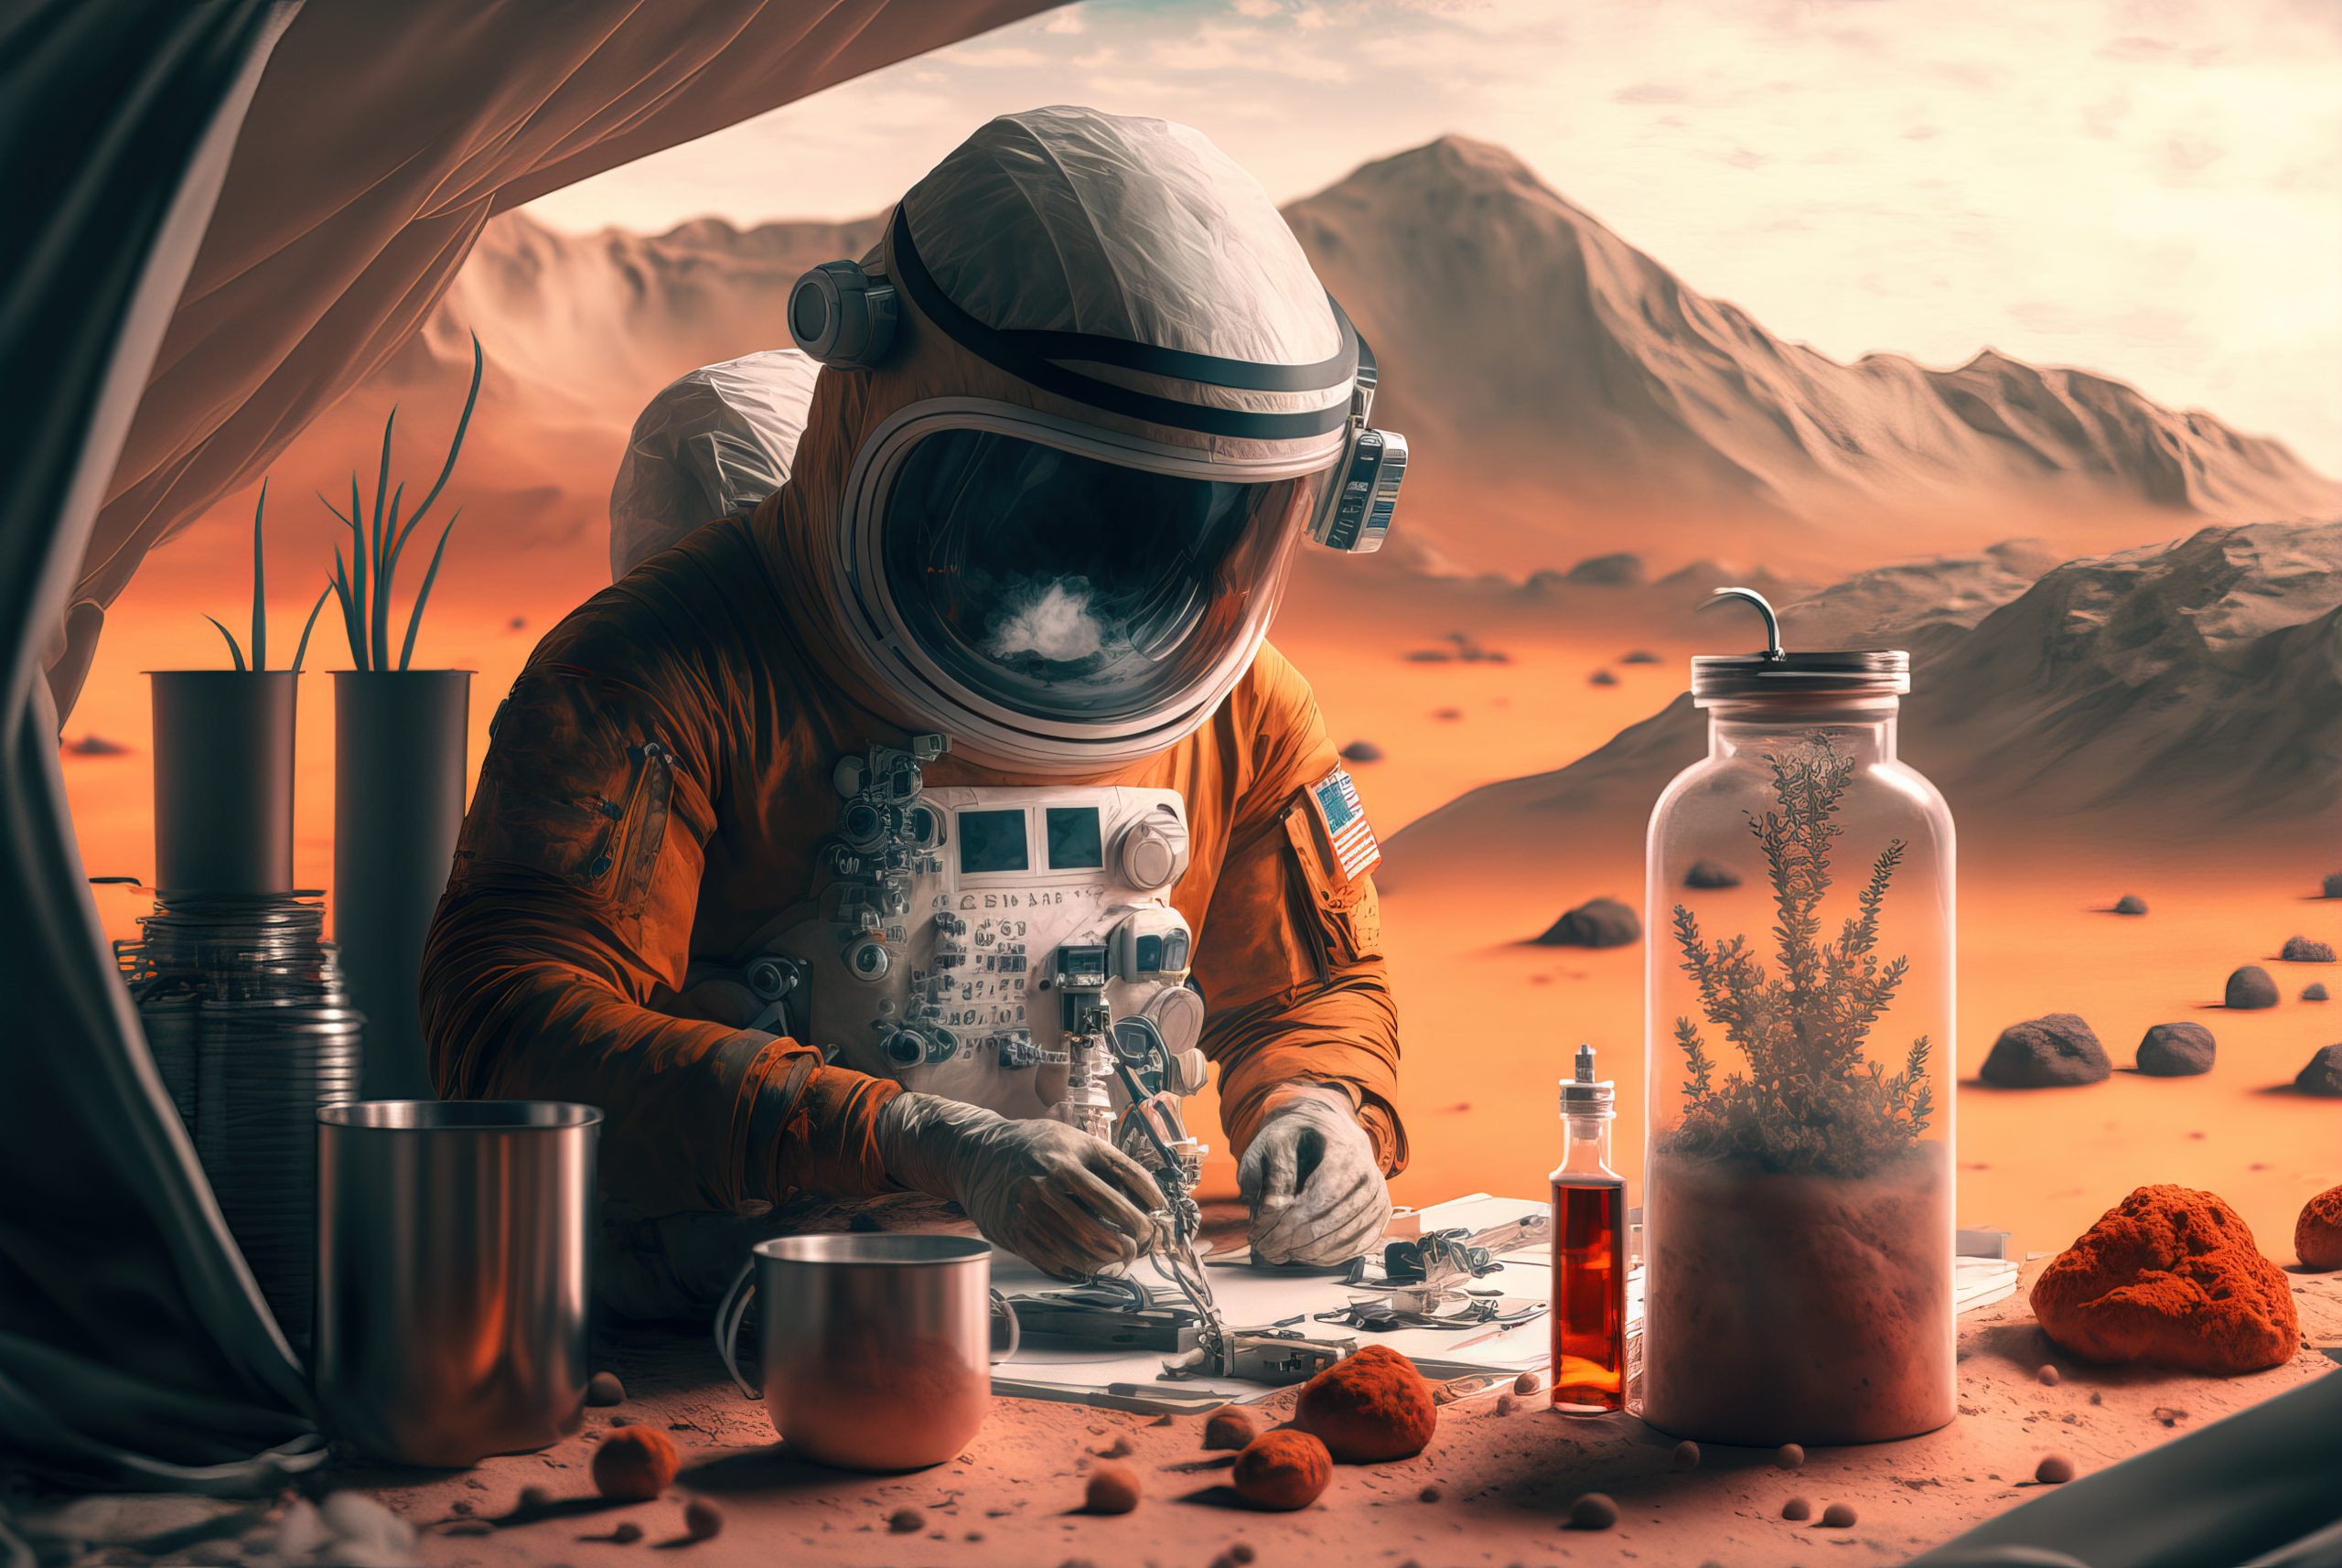 Lunar Astronauts Could Potentially Make Hummus with Moon-Grown Chickpeas - Image